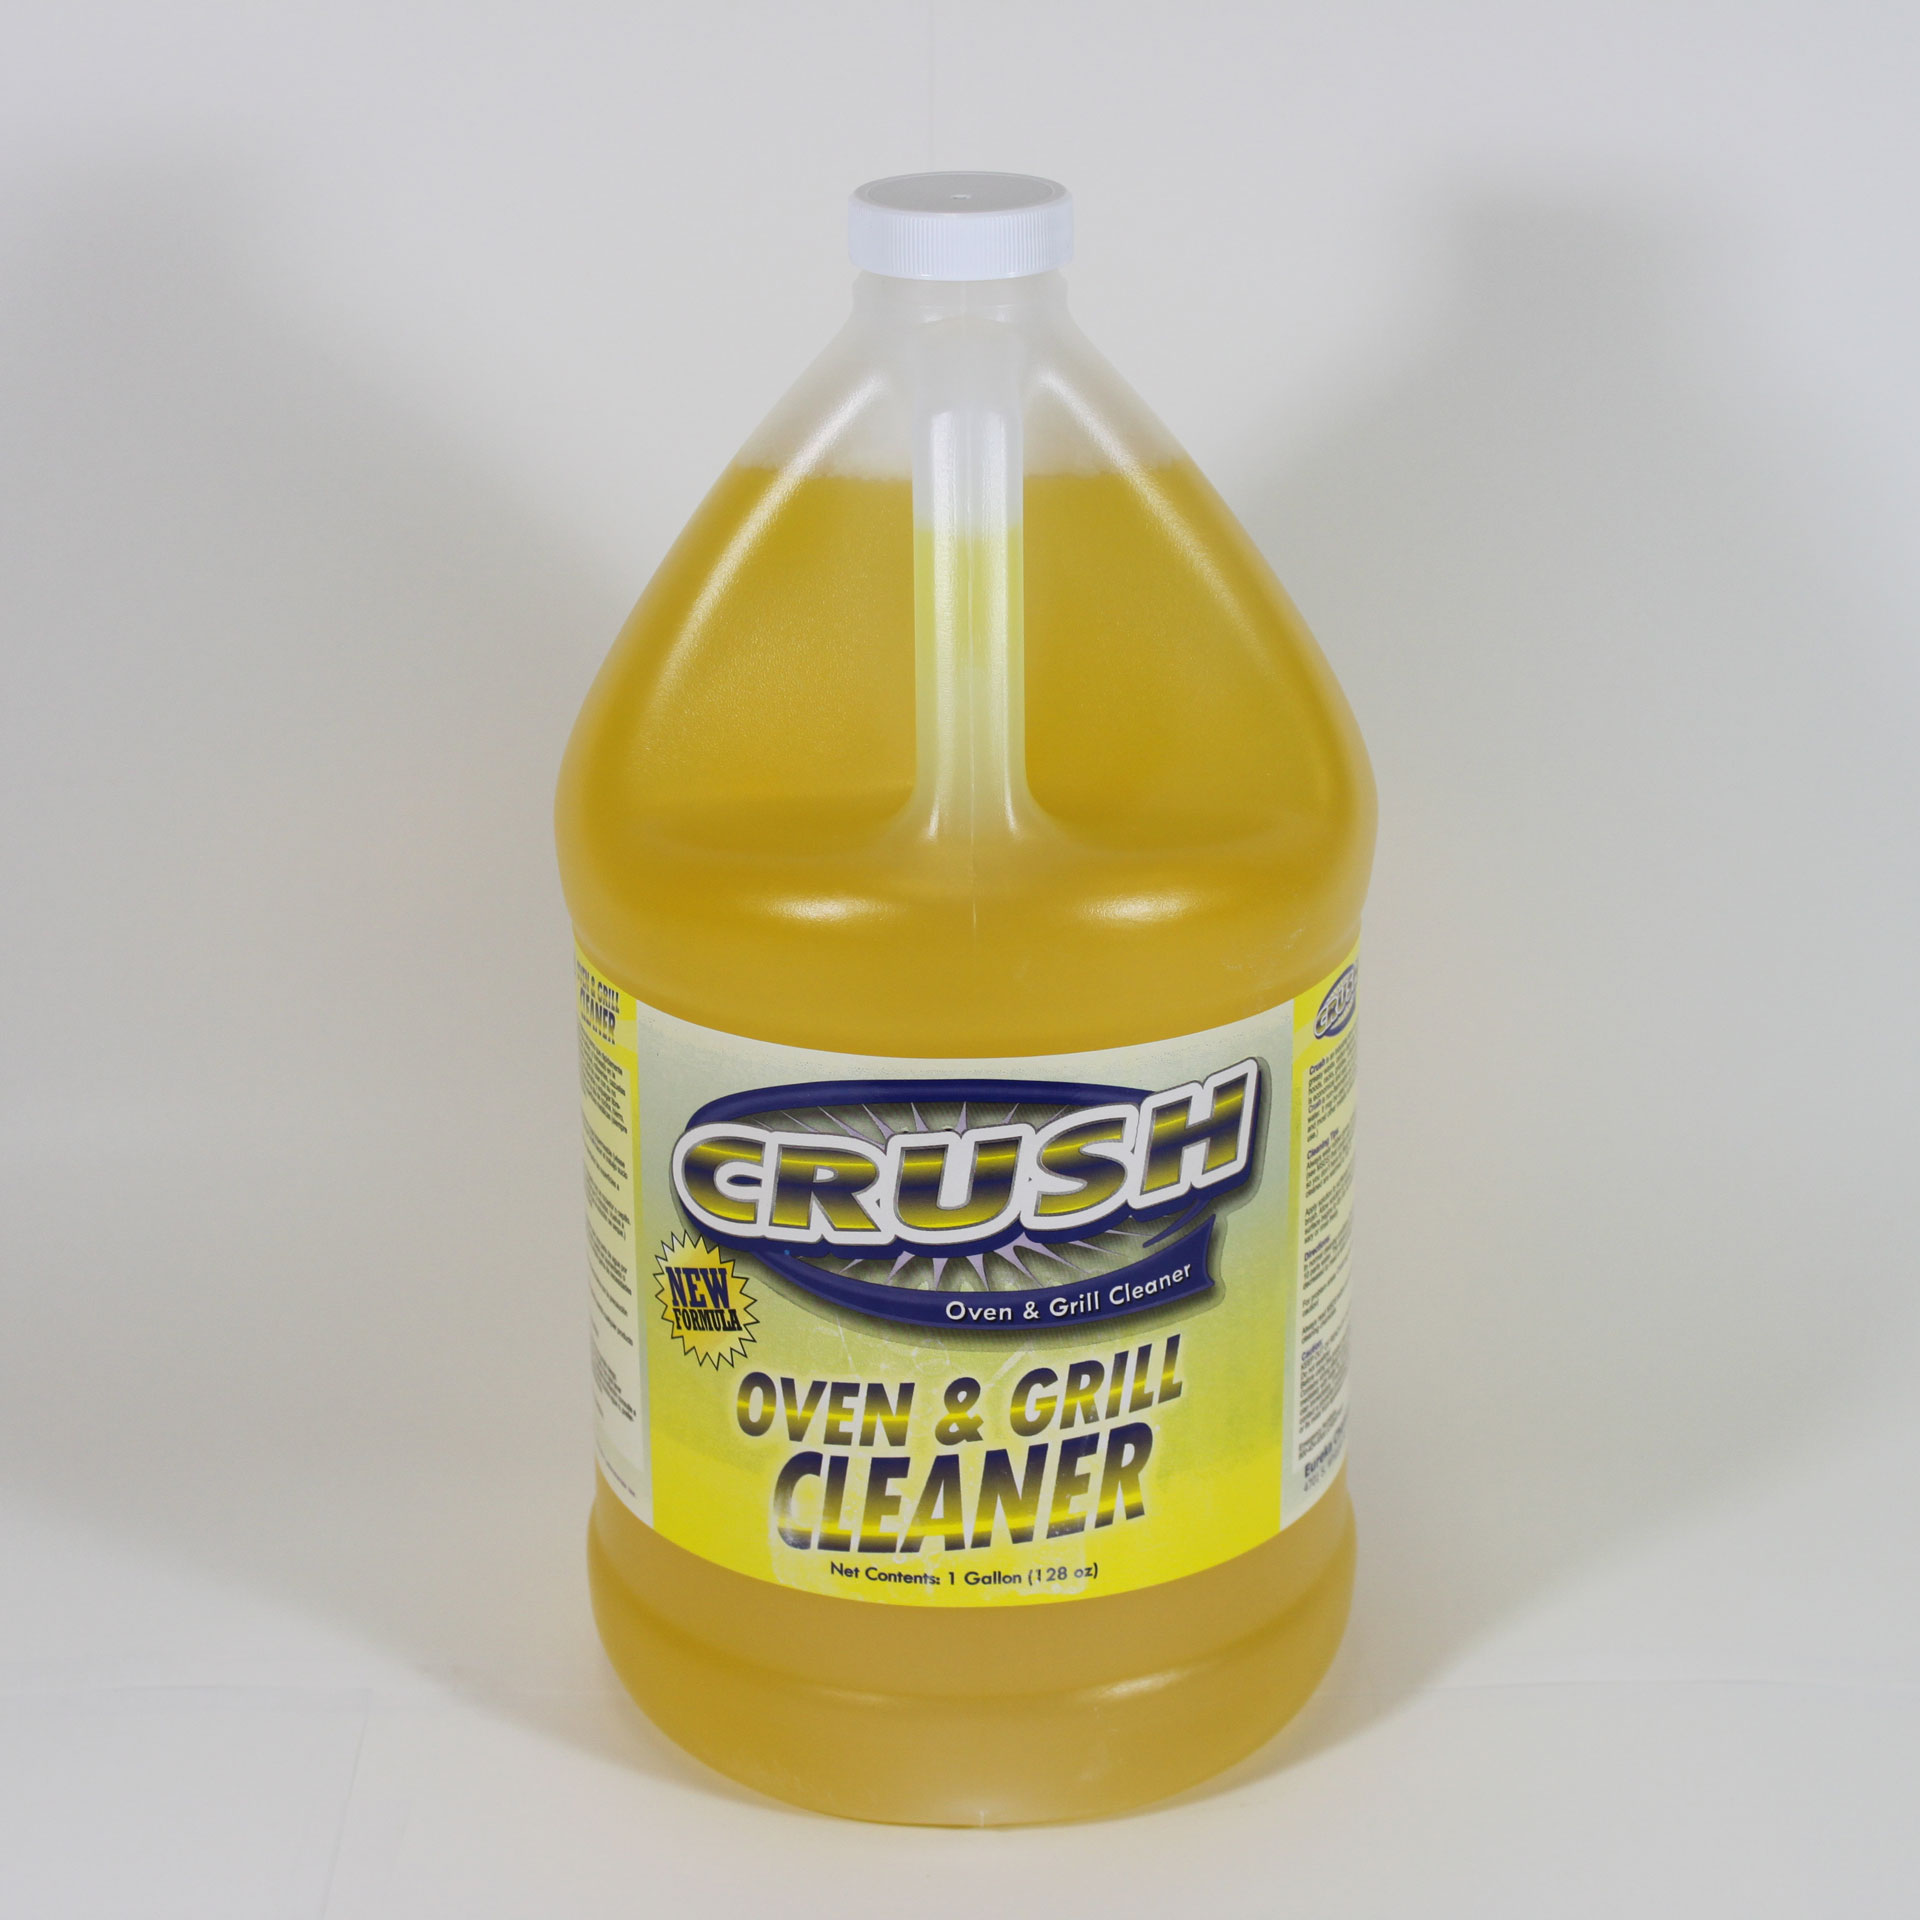 Bottle of Crush oven and grill cleaner.